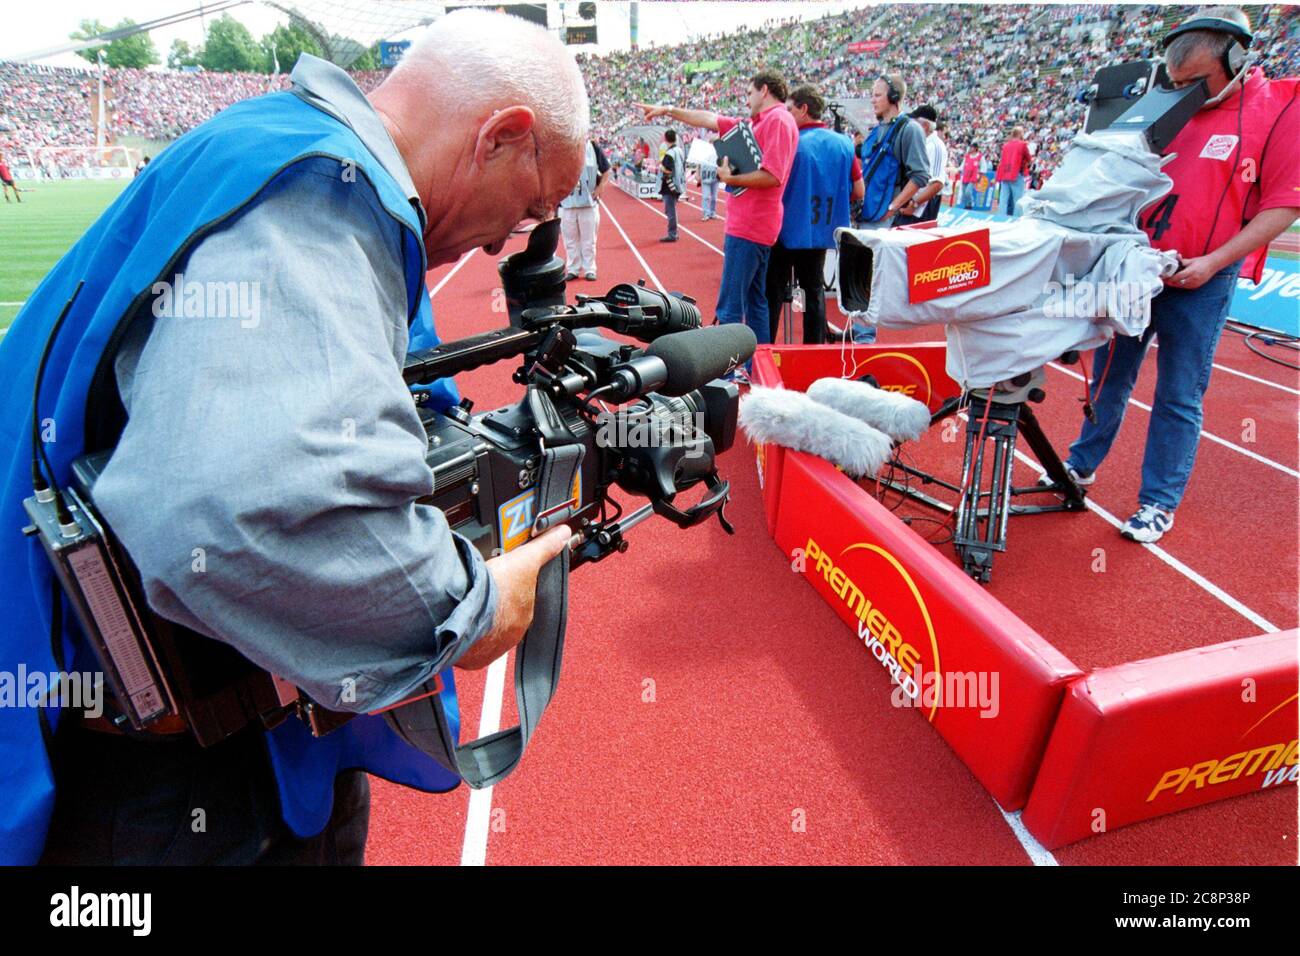 Zdf Channel High Resolution Stock Photography and Images - Alamy